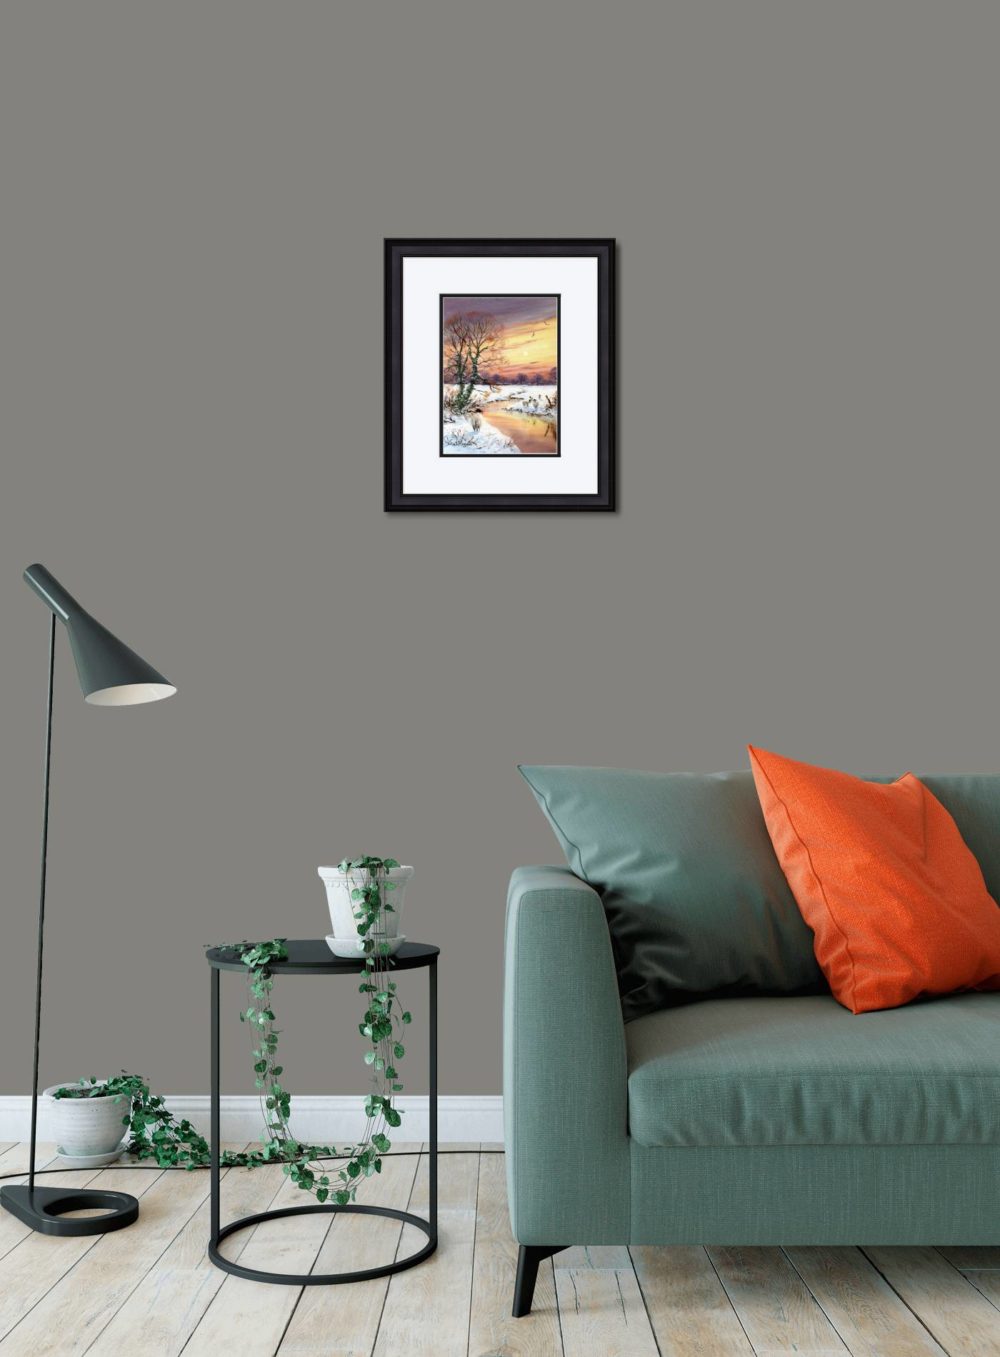 Snow Gortin Water Print (Small) in Black Frame in Room